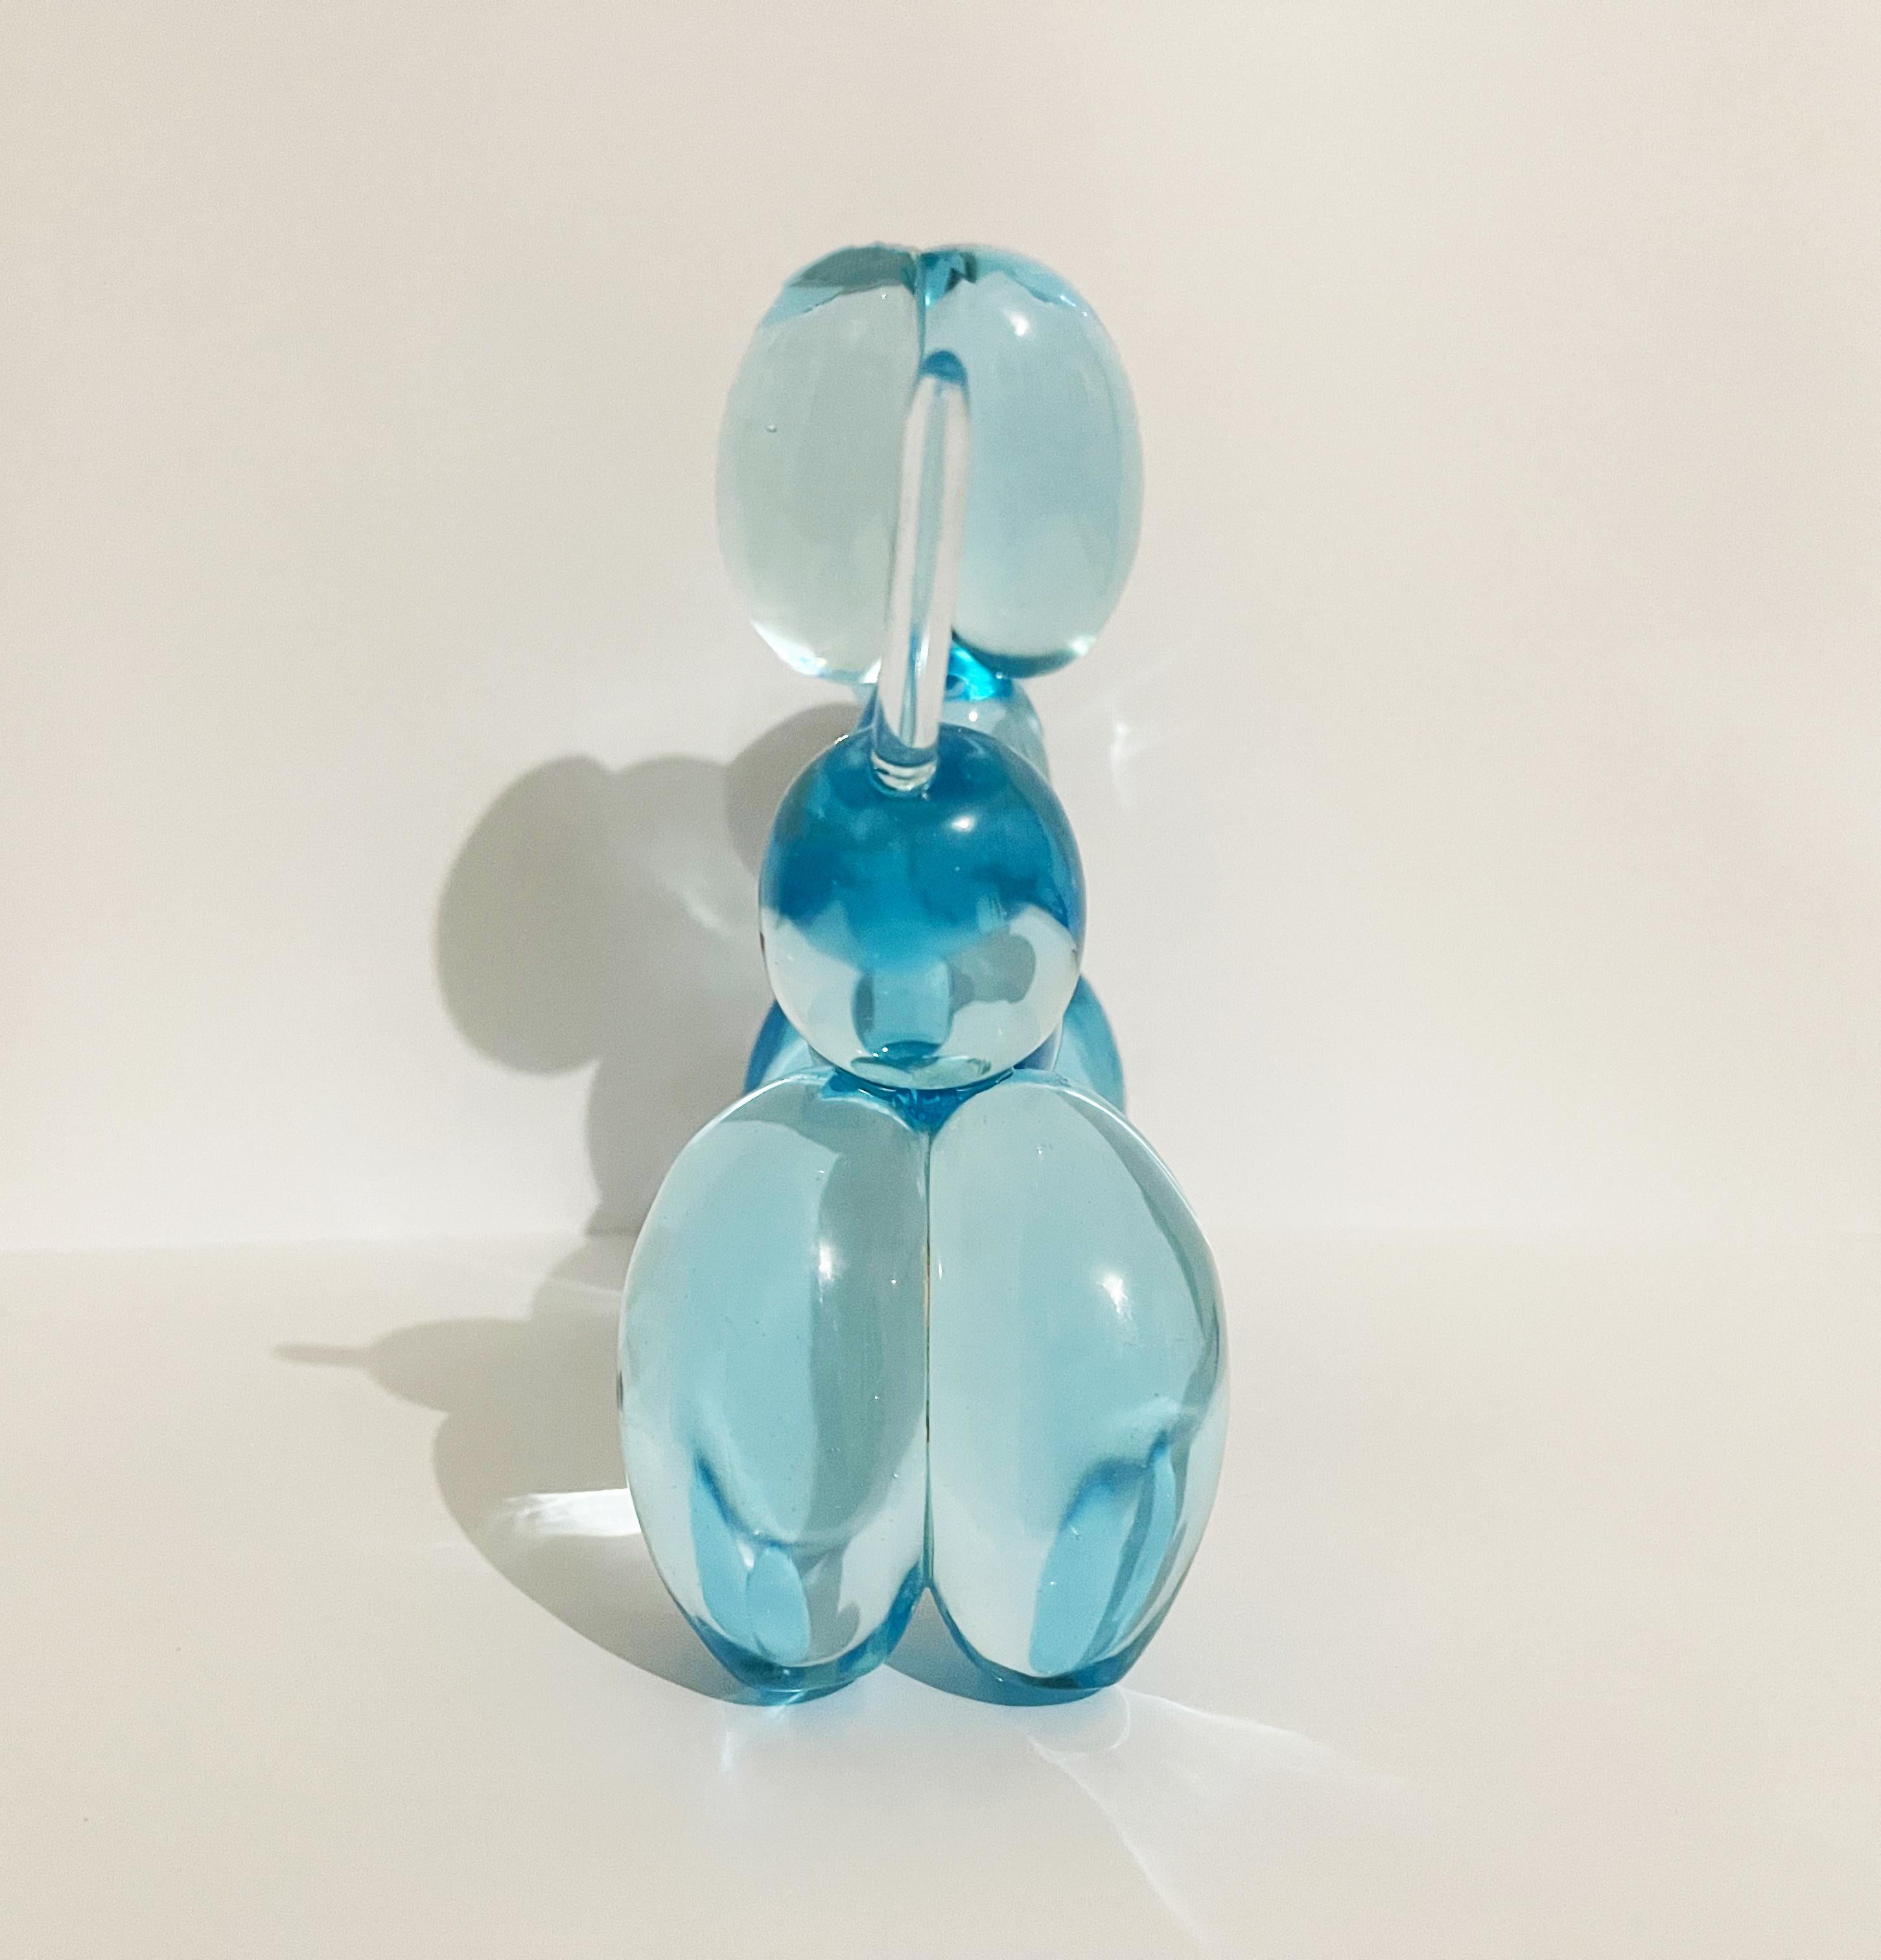 Hand-Crafted Contemporary 'Dog' Handmade Light Blue Crystal Sculpture by Ghirò Studio